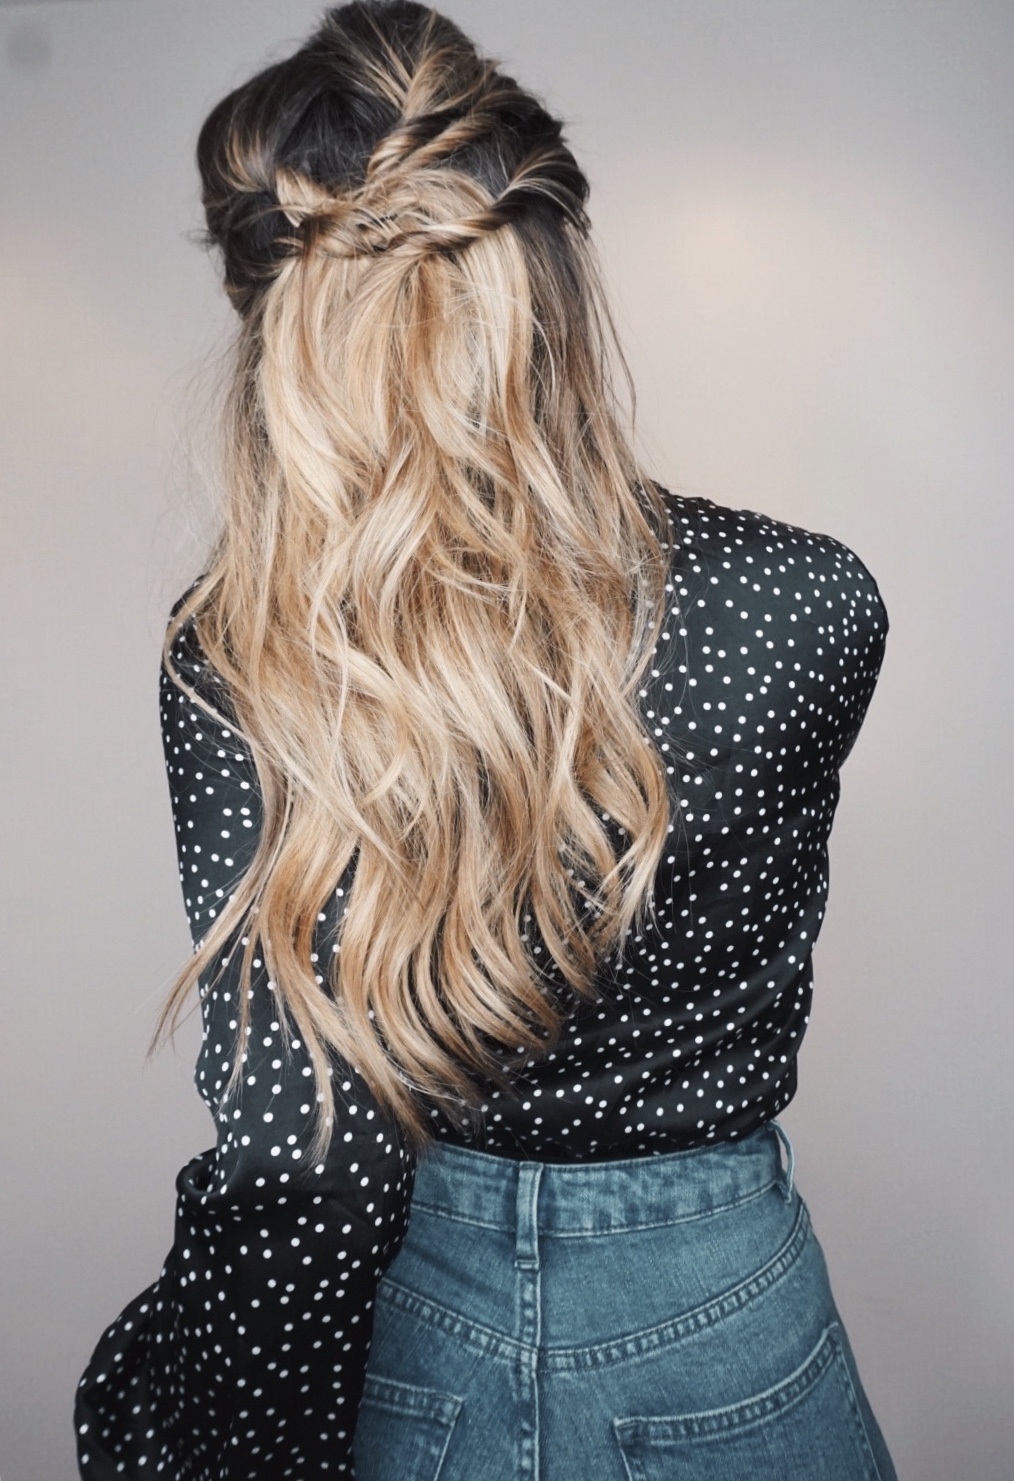 Jenna Boron of Life and Personal Style Blog, Balance and Chaos, shares how she achieved this twist-back hair style using T3 Micro Convertible Curling Iron